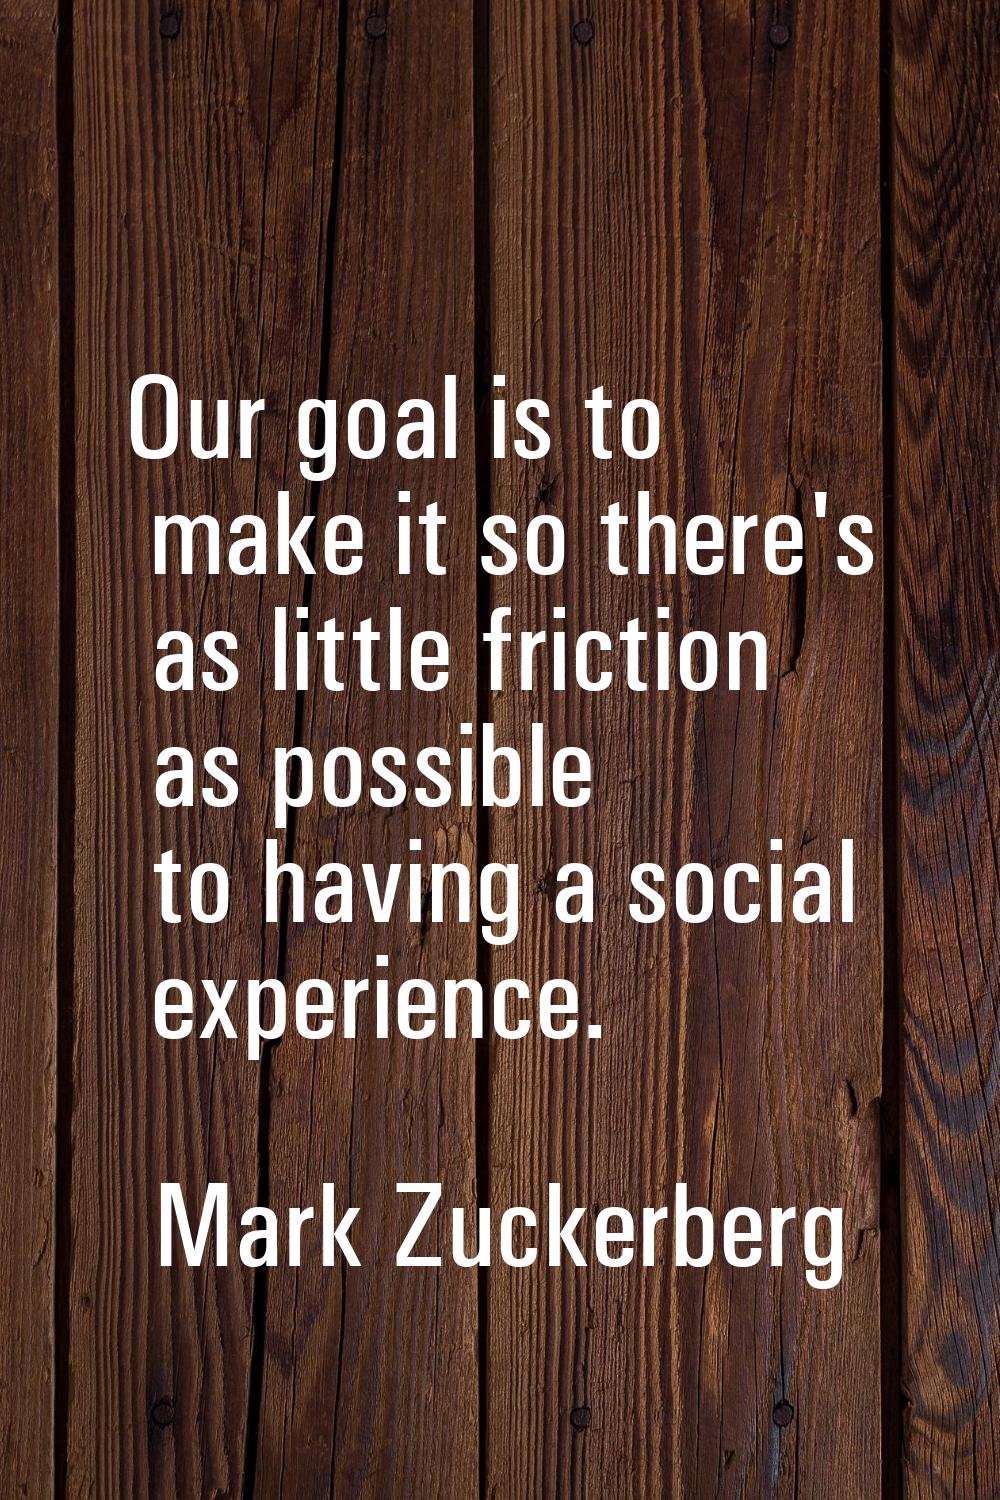 Our goal is to make it so there's as little friction as possible to having a social experience.